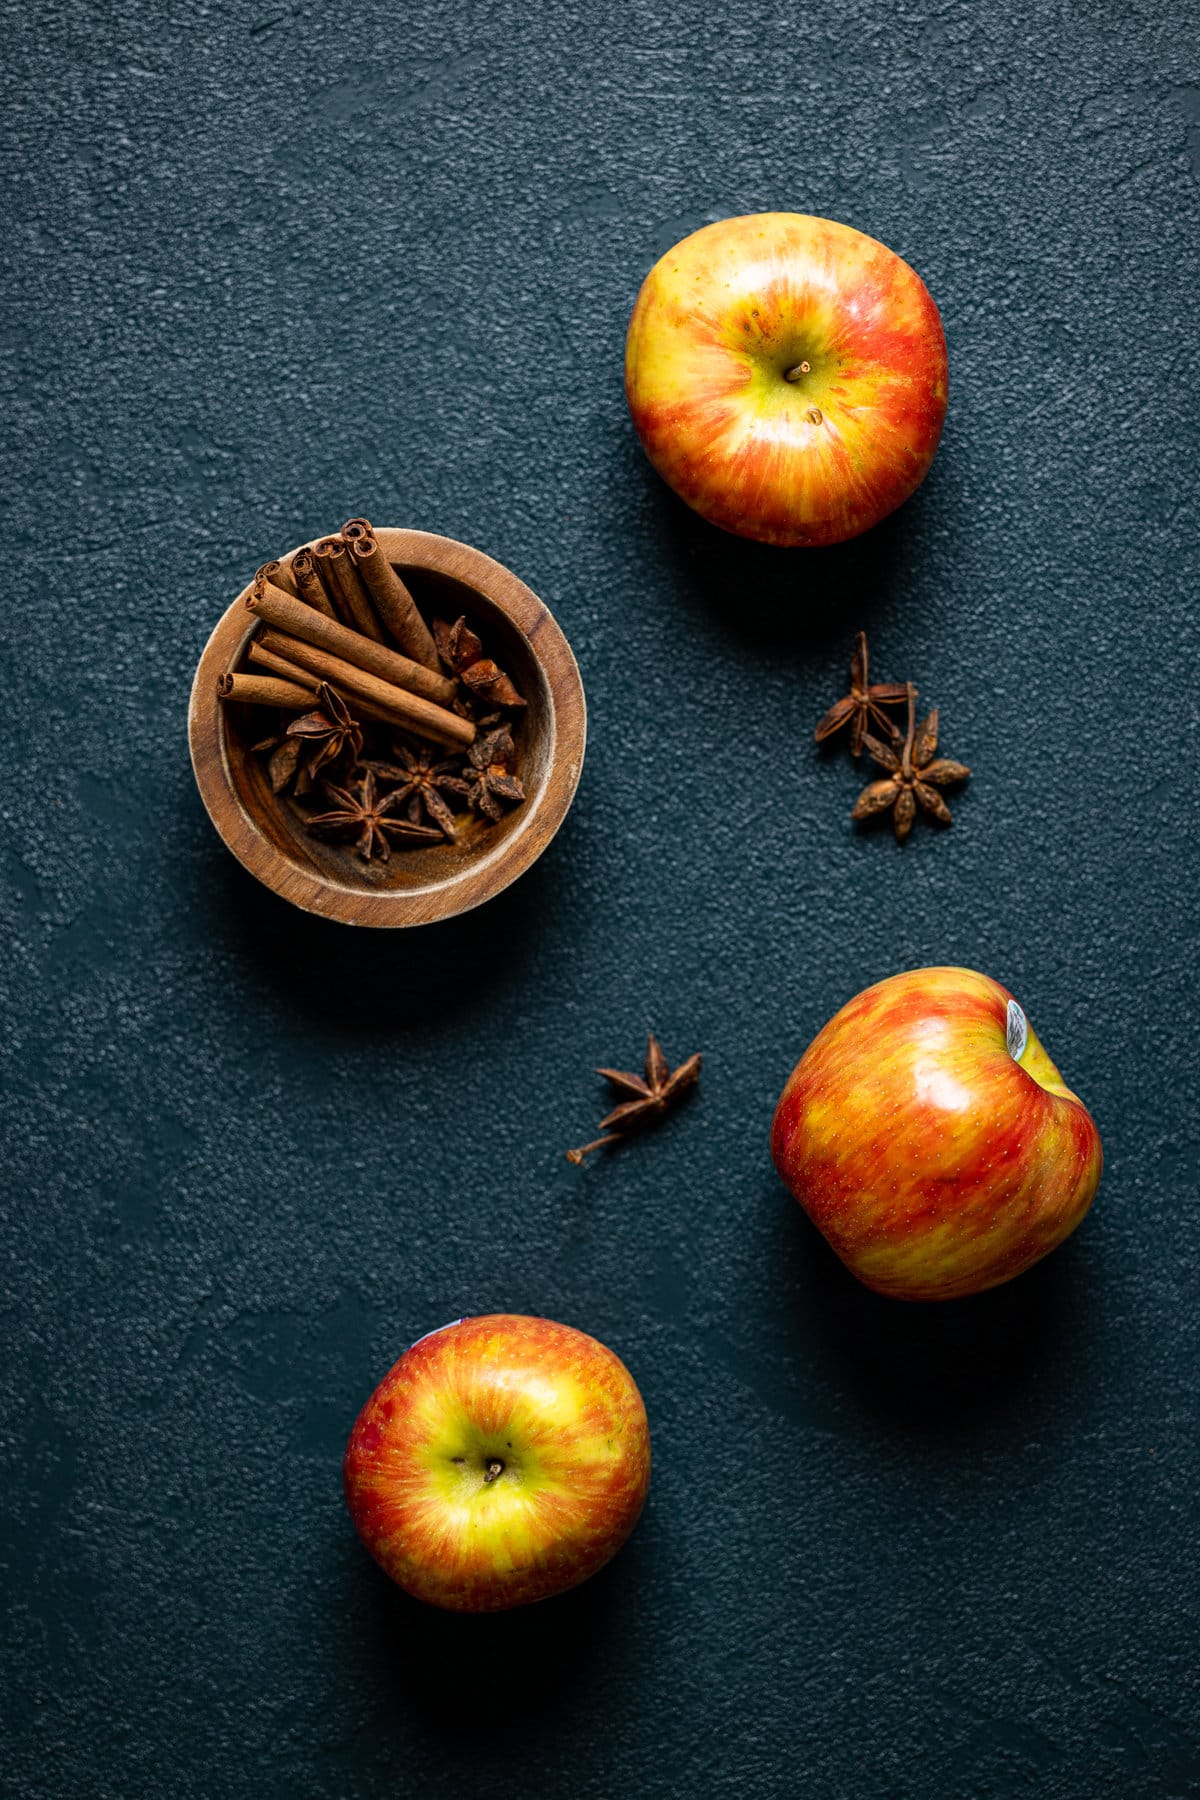 Apples with whole spices